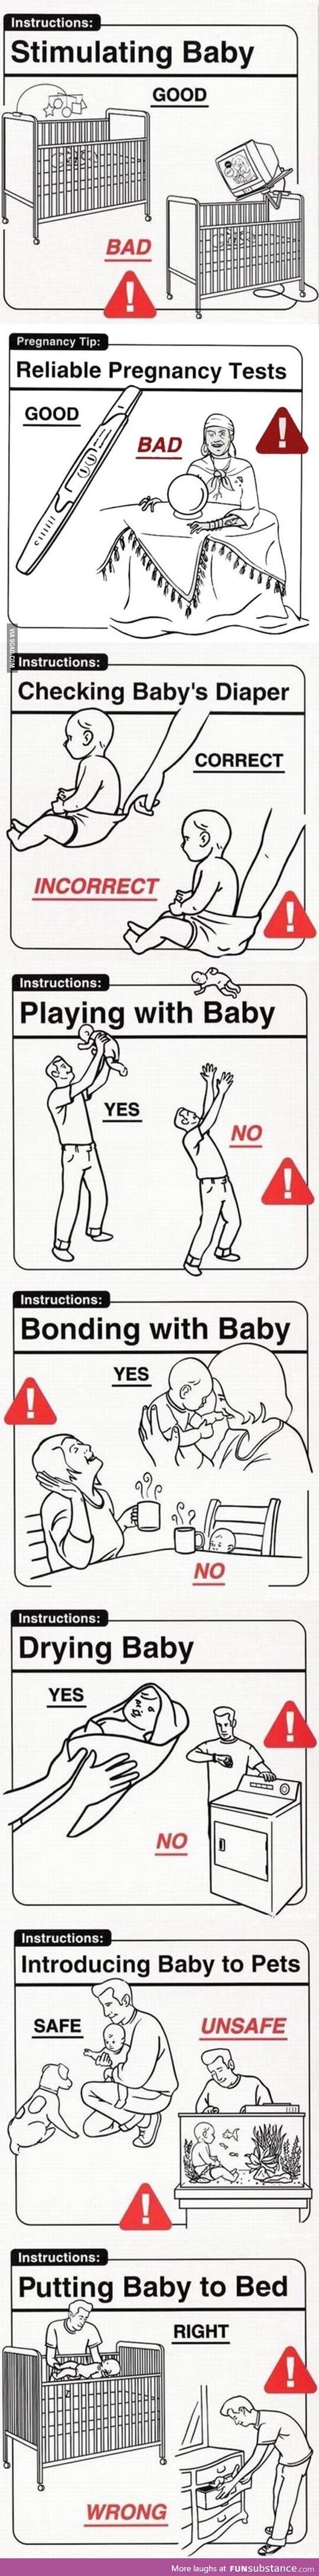 Parenting tips for all you current/future parents out there...